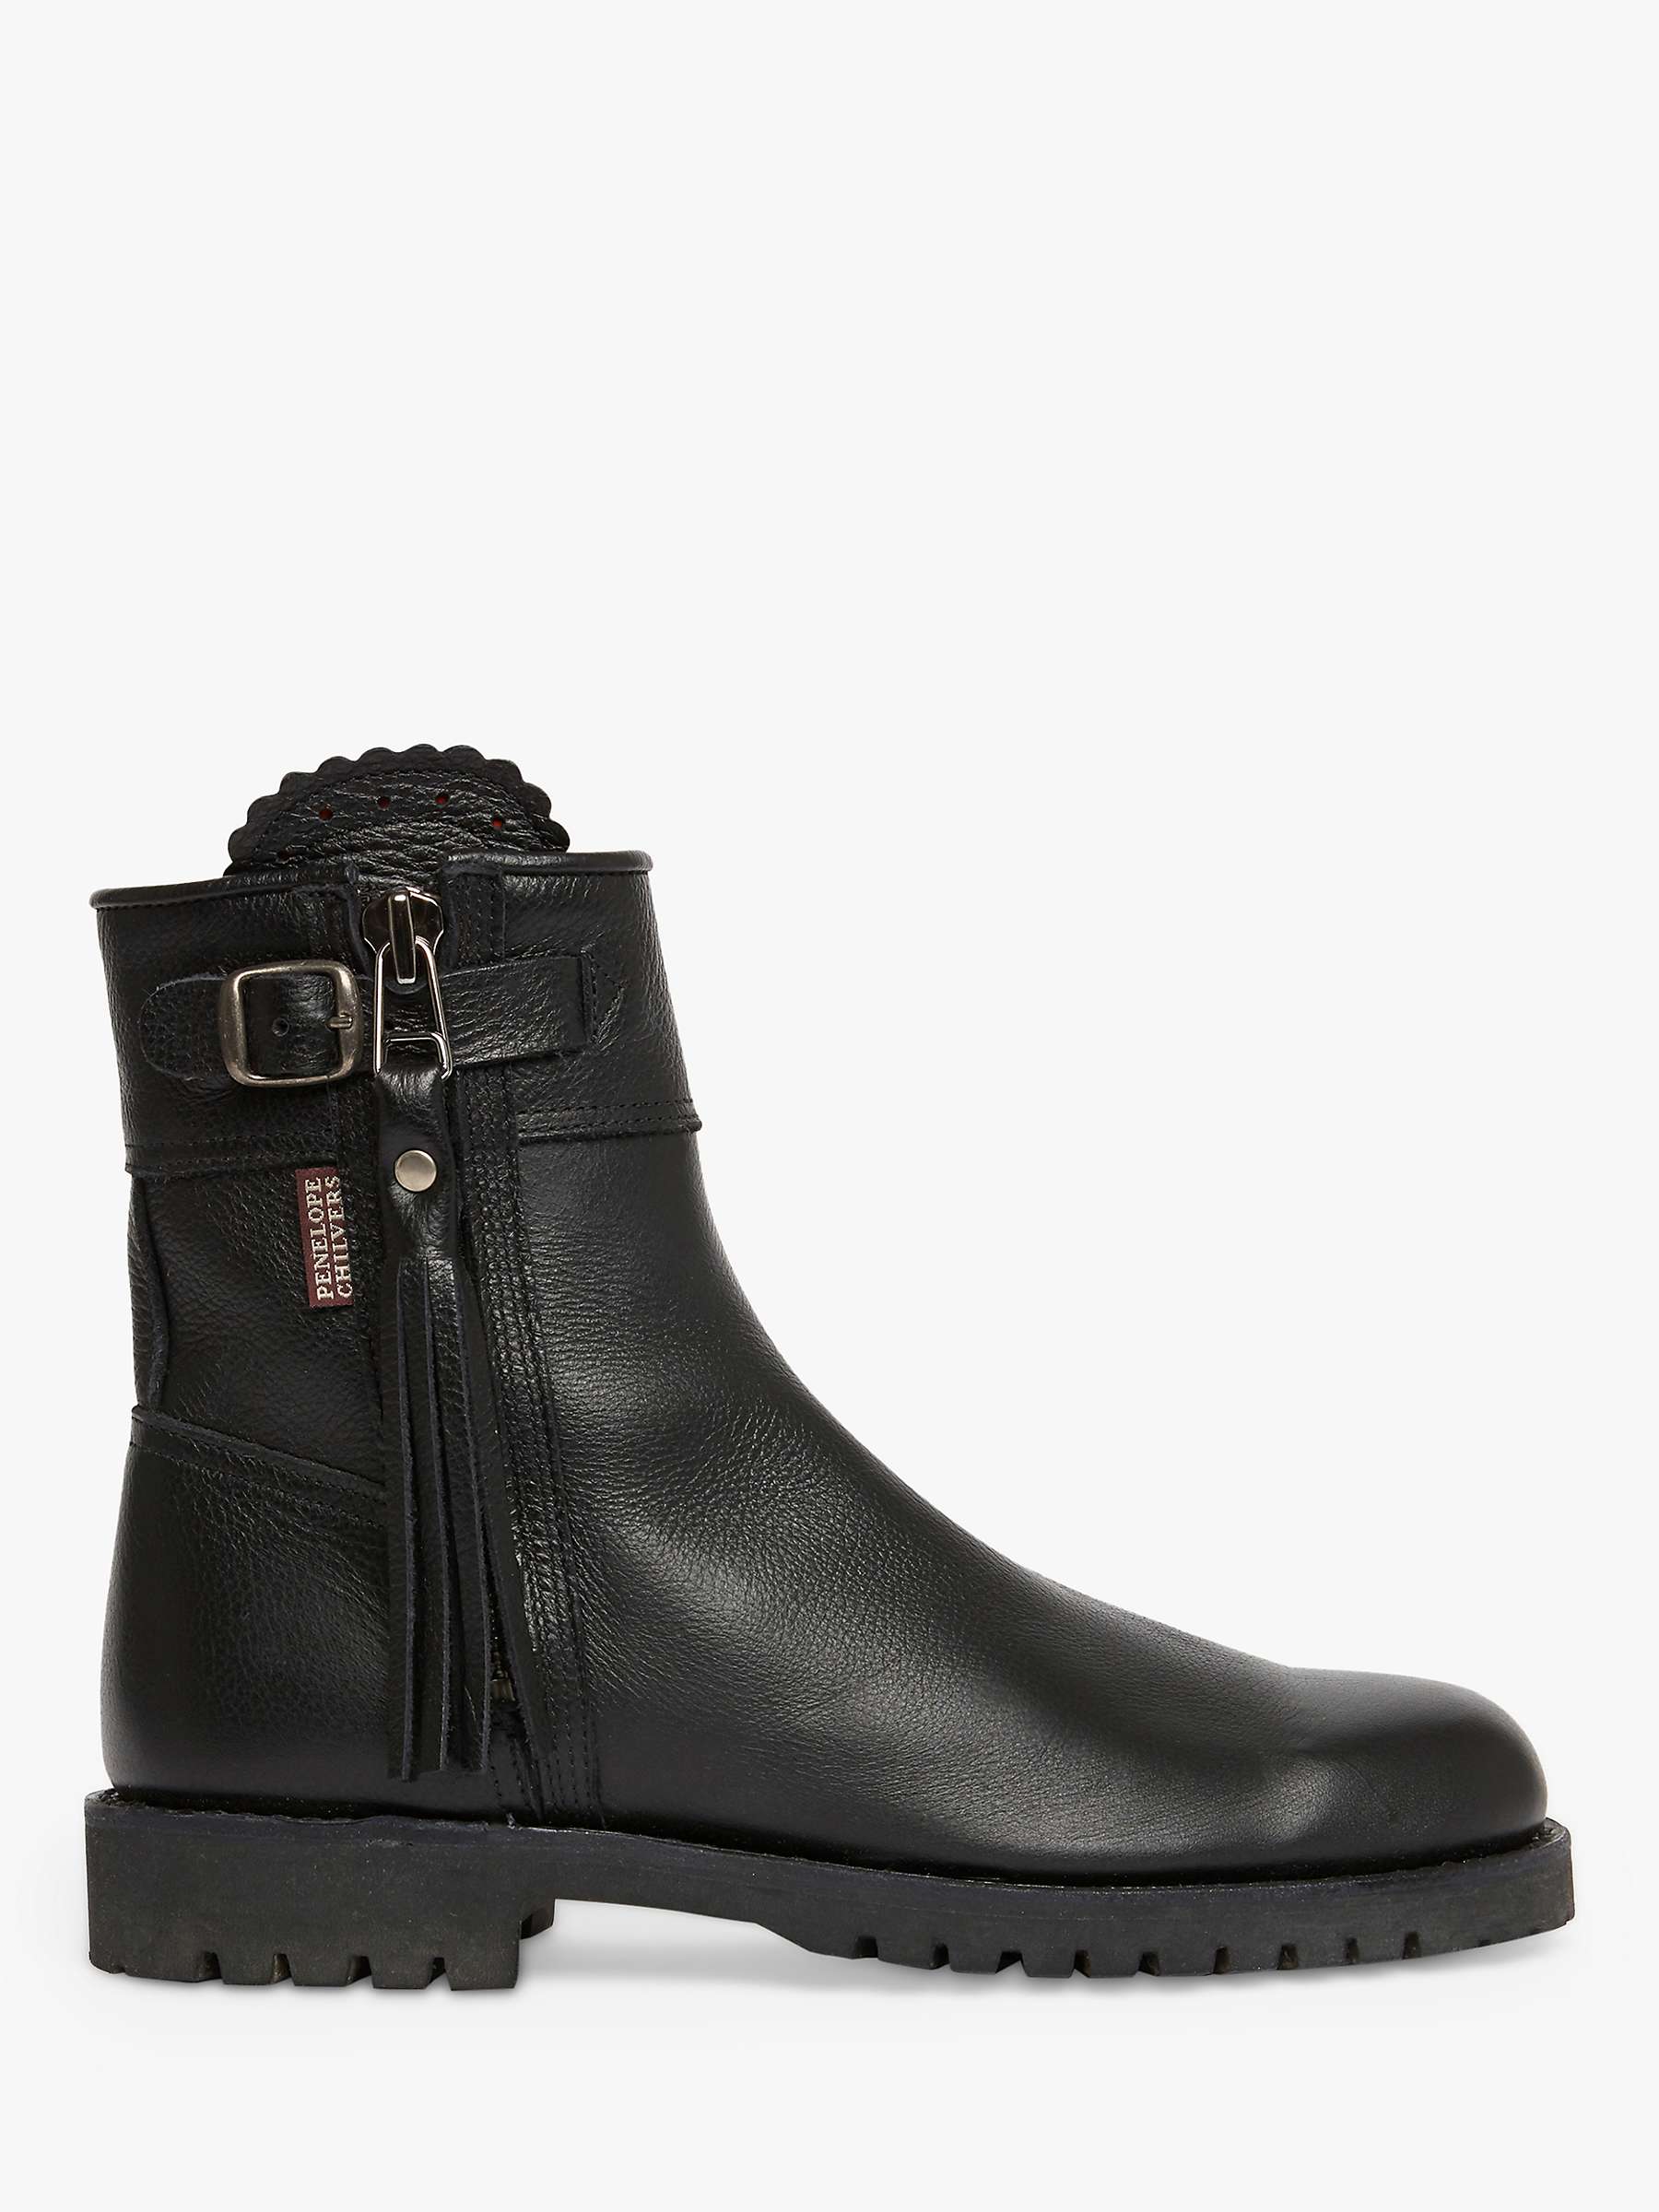 Buy Penelope Chilvers Leather Cropped Leather Tassel Boots, Black Online at johnlewis.com